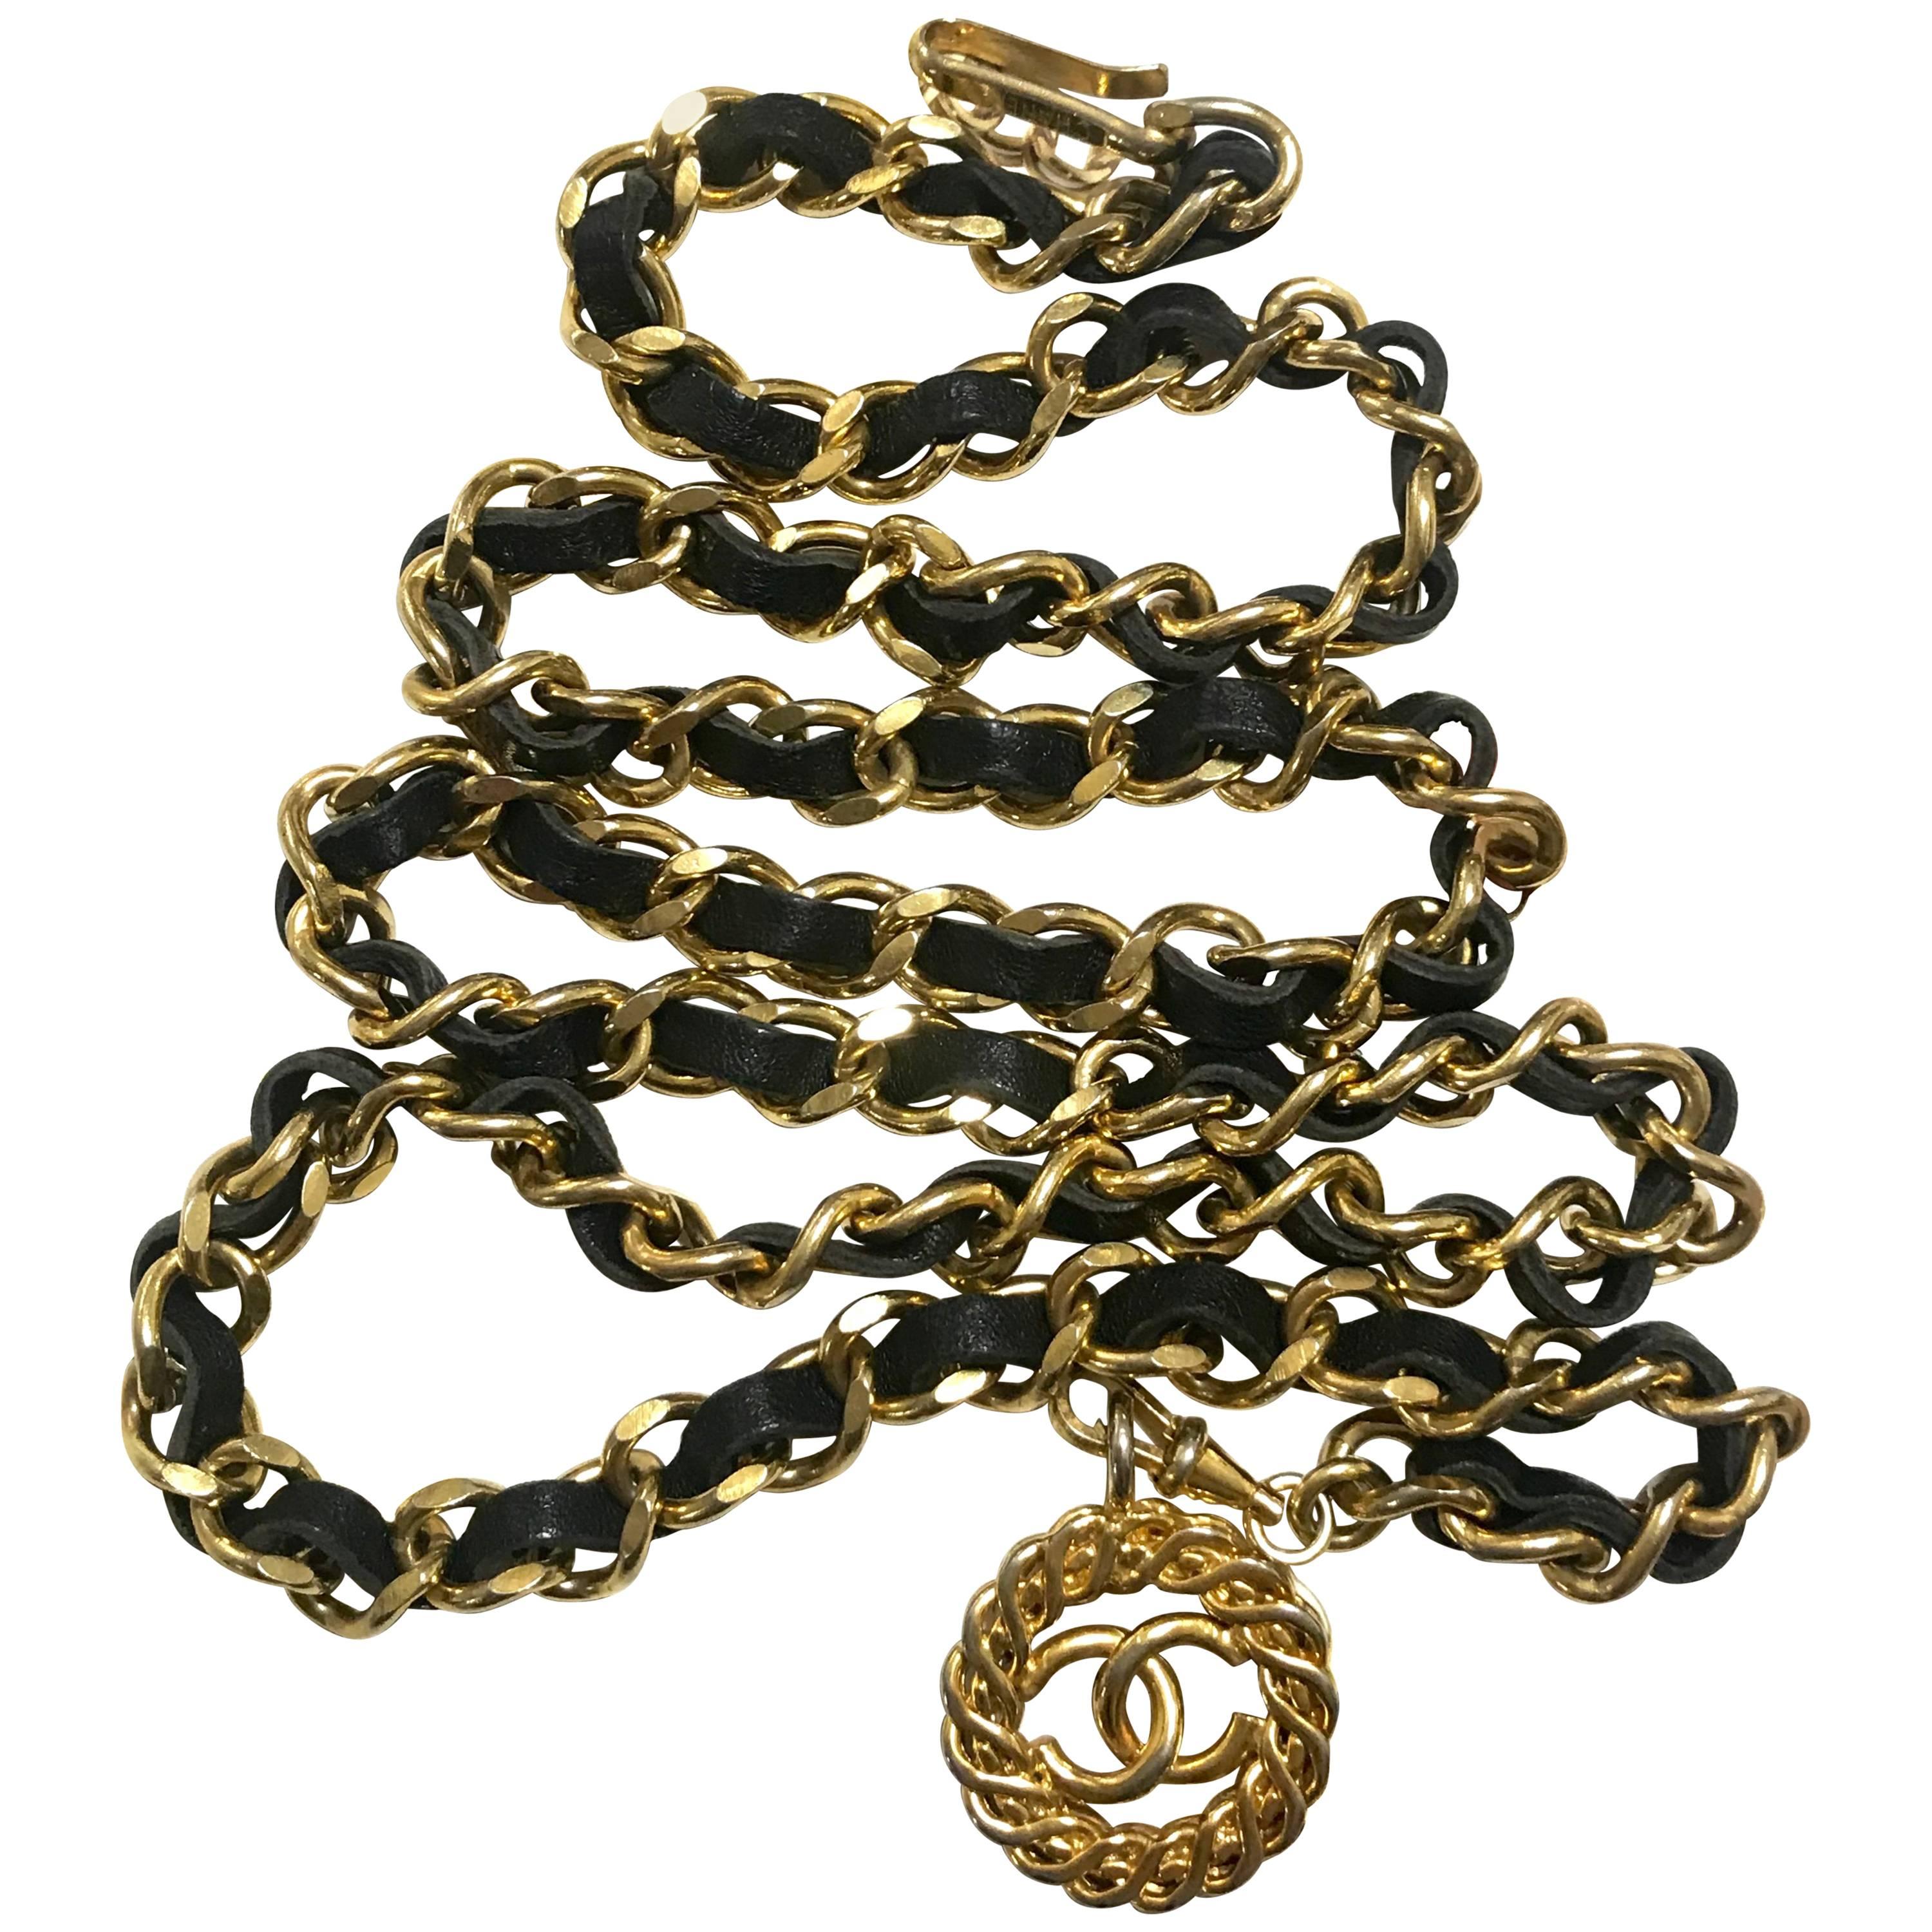 Vintage CHANEL golden chain and black belt/necklace with flower CC mark charm. 